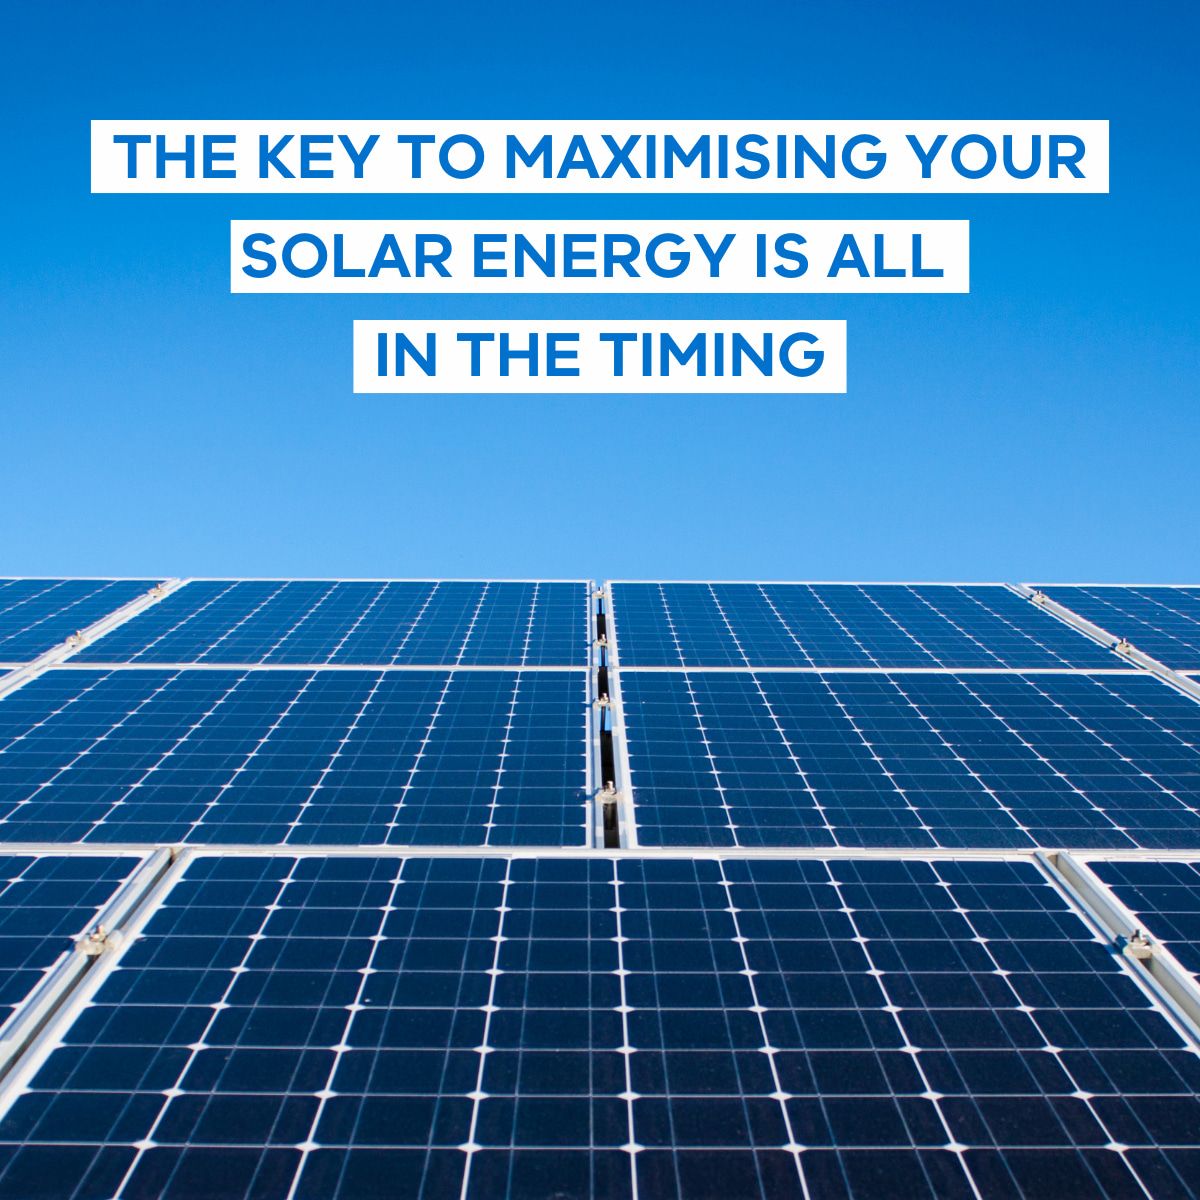 Solar panels on roof with text the key to maximising your solar energy is all in the timing